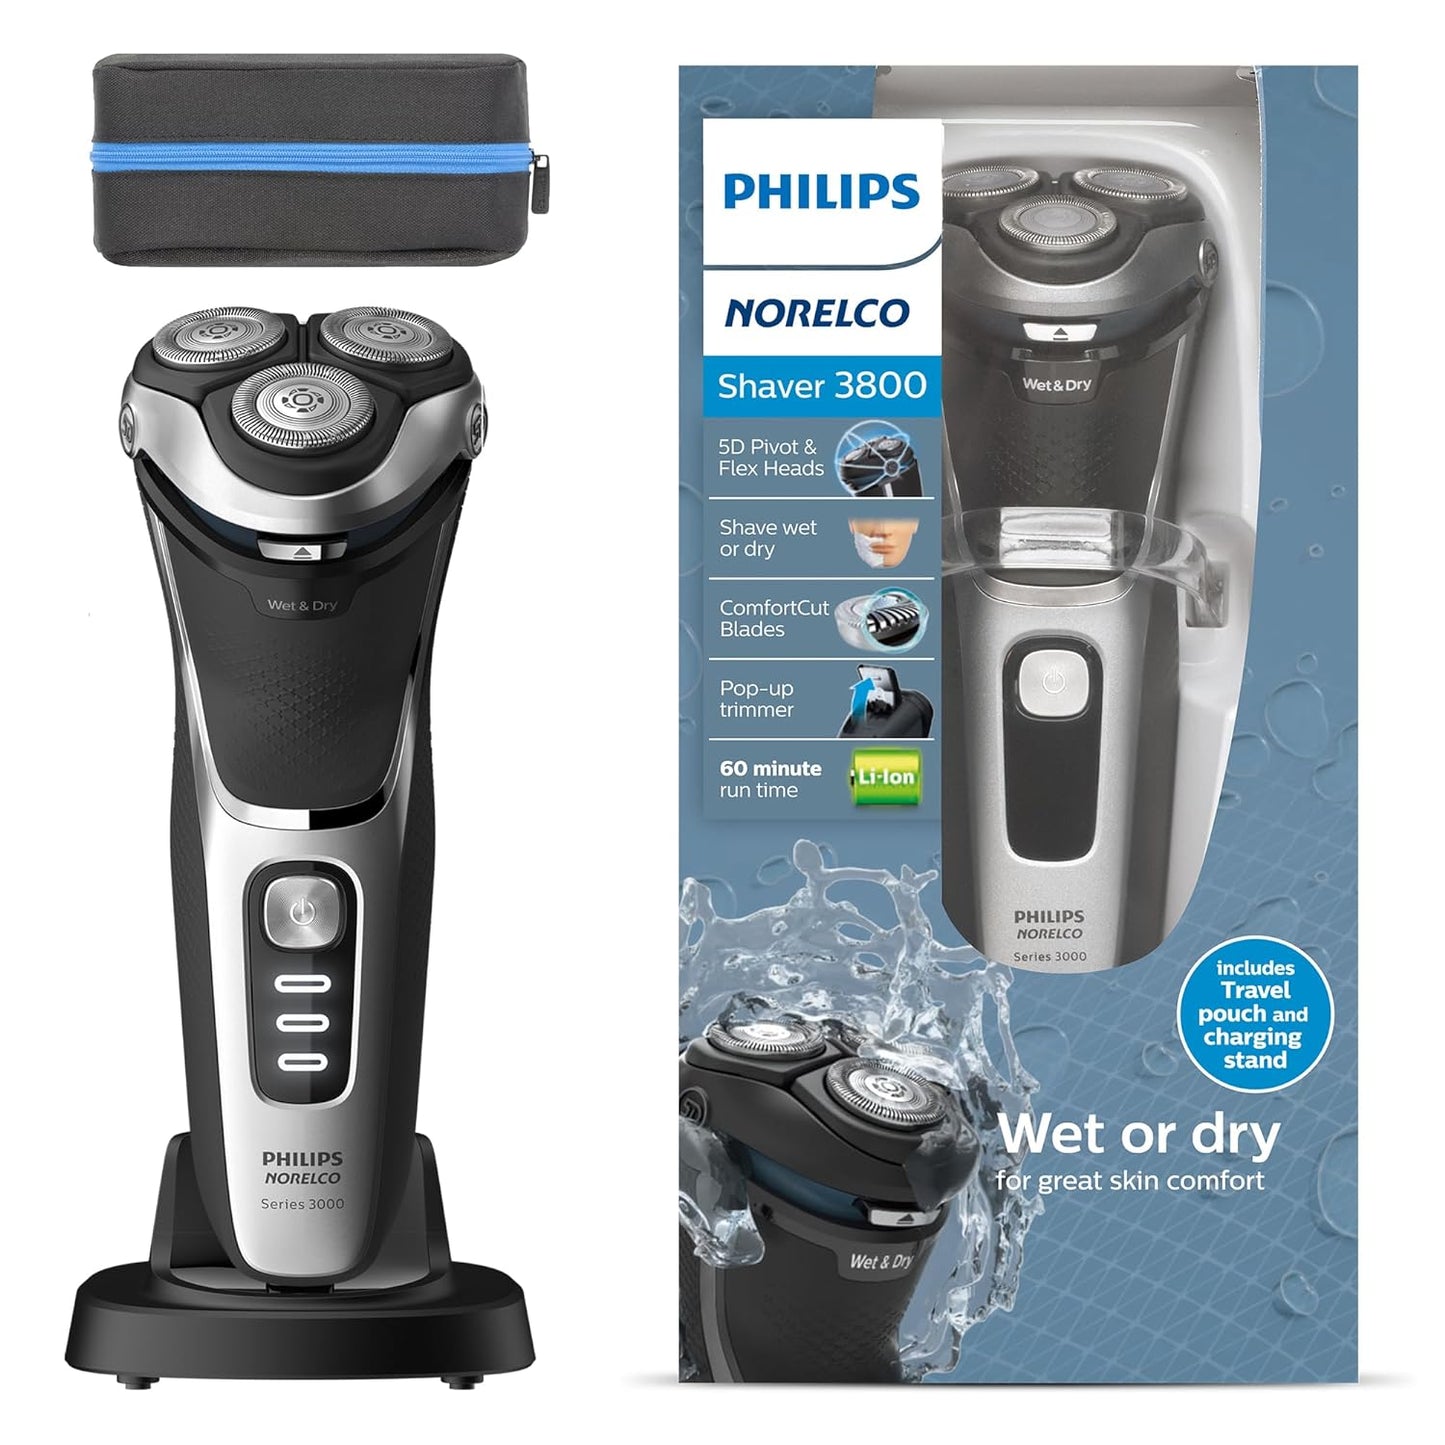 UniitesMarketplace.com™, Philips Norelco Shaver 3800, Rechargeable Wet & Dry Shaver with Pop-up Trimmer, Charging Stand and Storage Pouch, Space Gray, S3311/85, $63.91